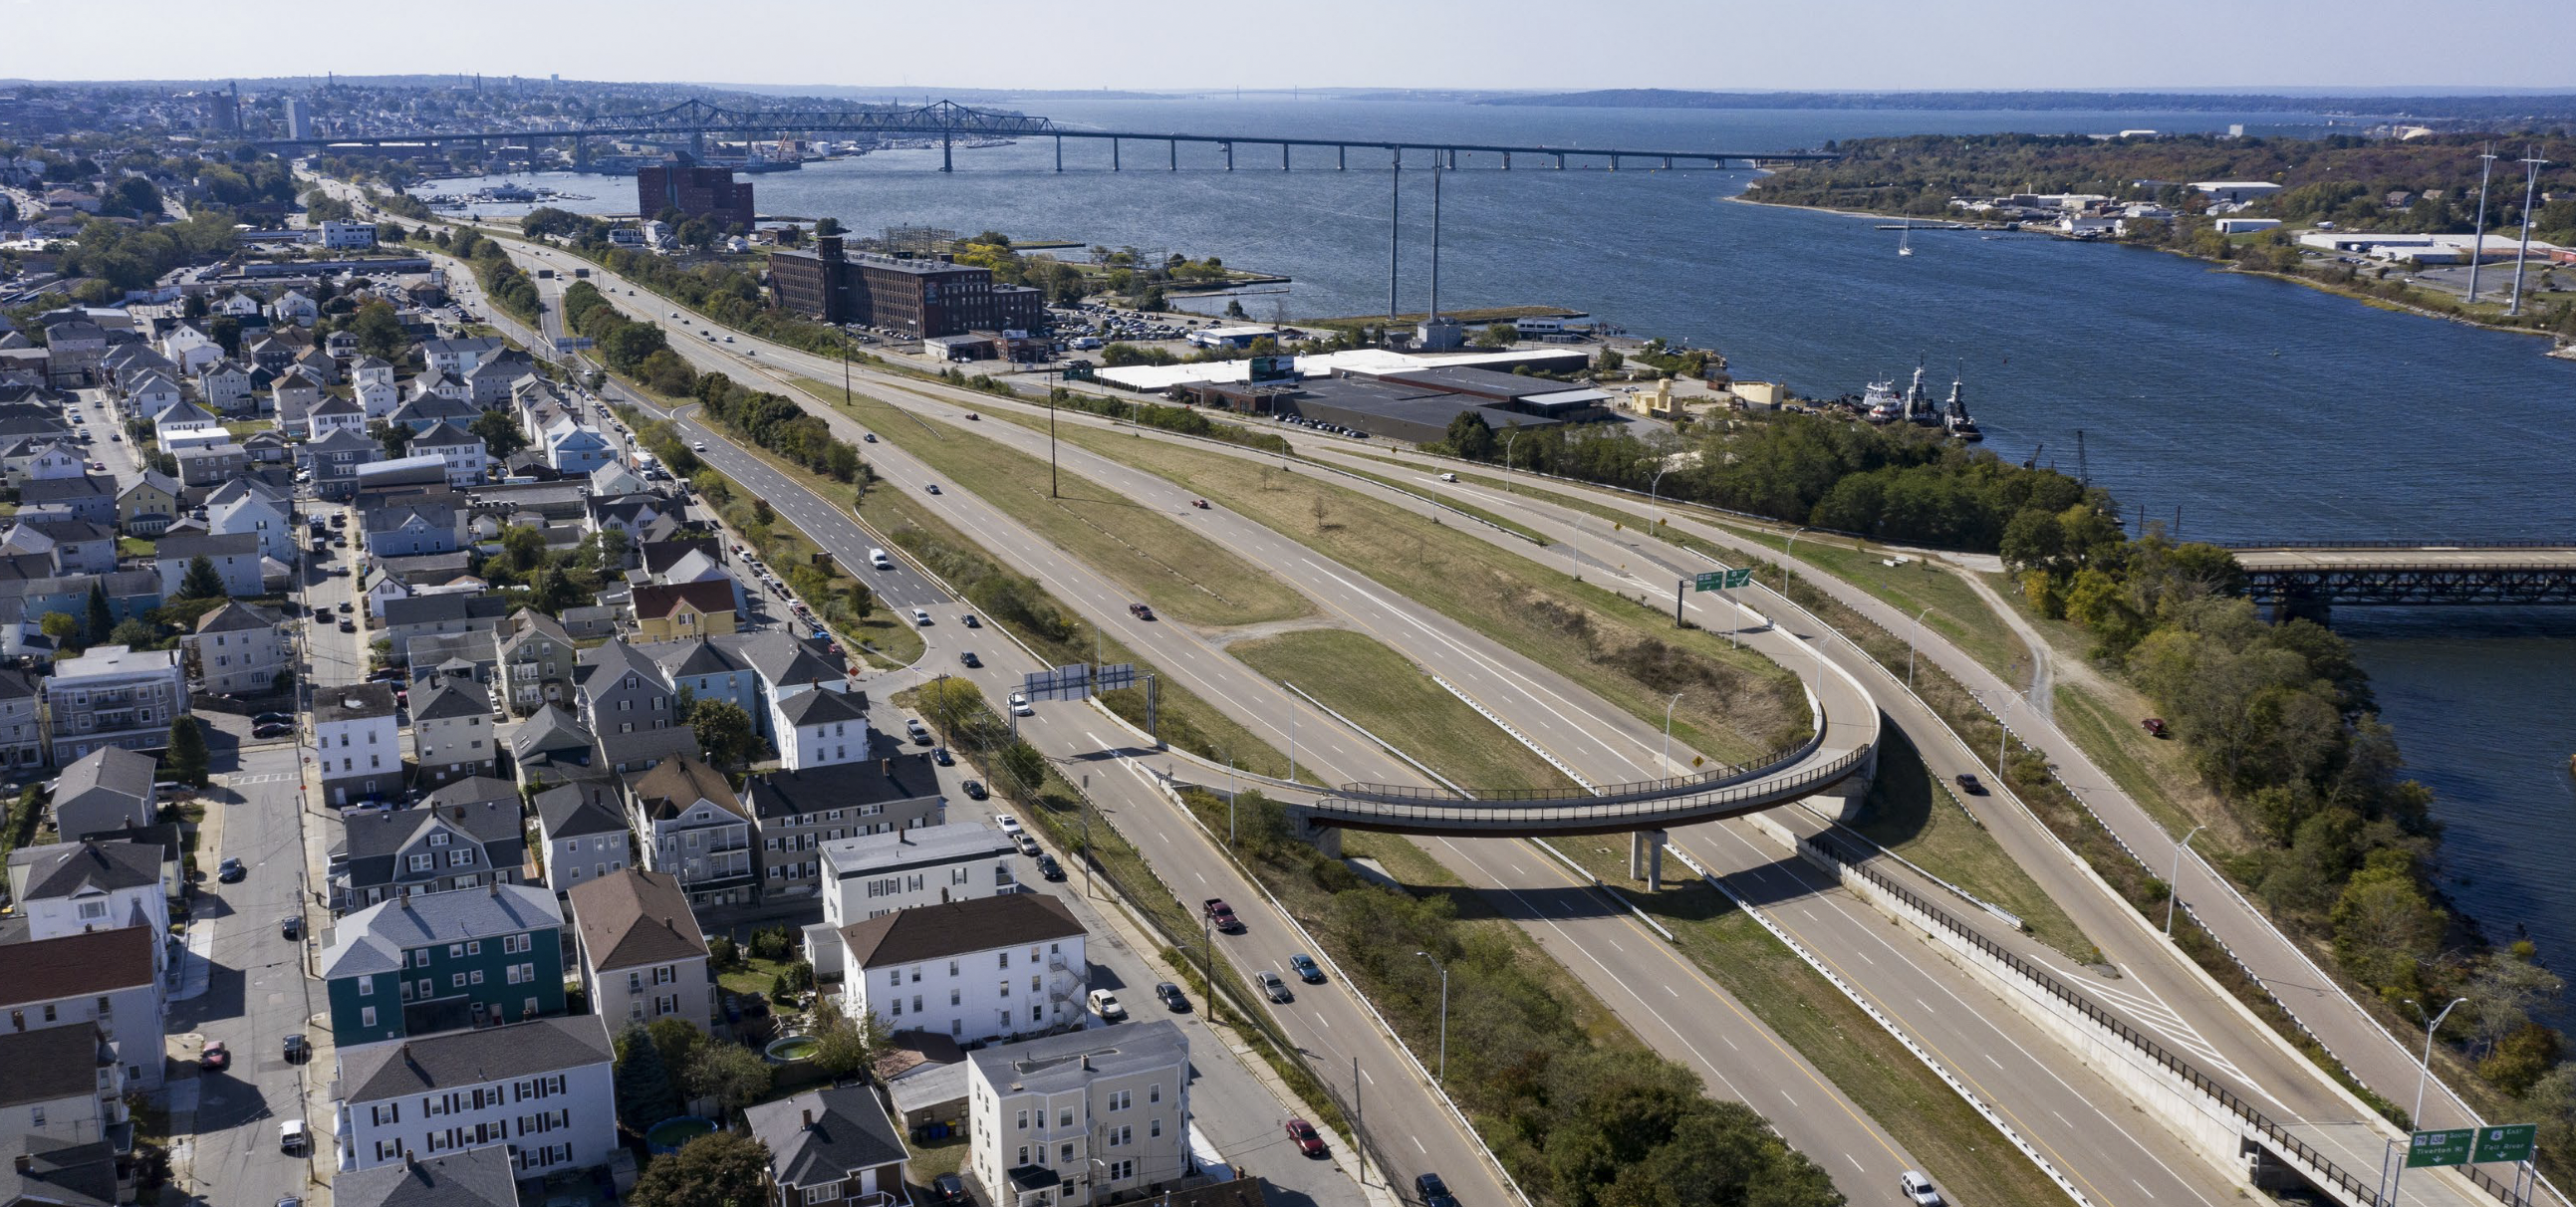 An aerial view of Fall River's Route 79 expressway, looking south towards downtown Fall River (top left) and Mt. Hope Bay (top right). The view is dominated by the massive Route 79, which occupies 8 to 14 lanes alongside wide expanses of empty grass along Fall River's waterfront. Along the left edge of the photo is visible the densely-populated residential neighborhoods of Fall River's North End.